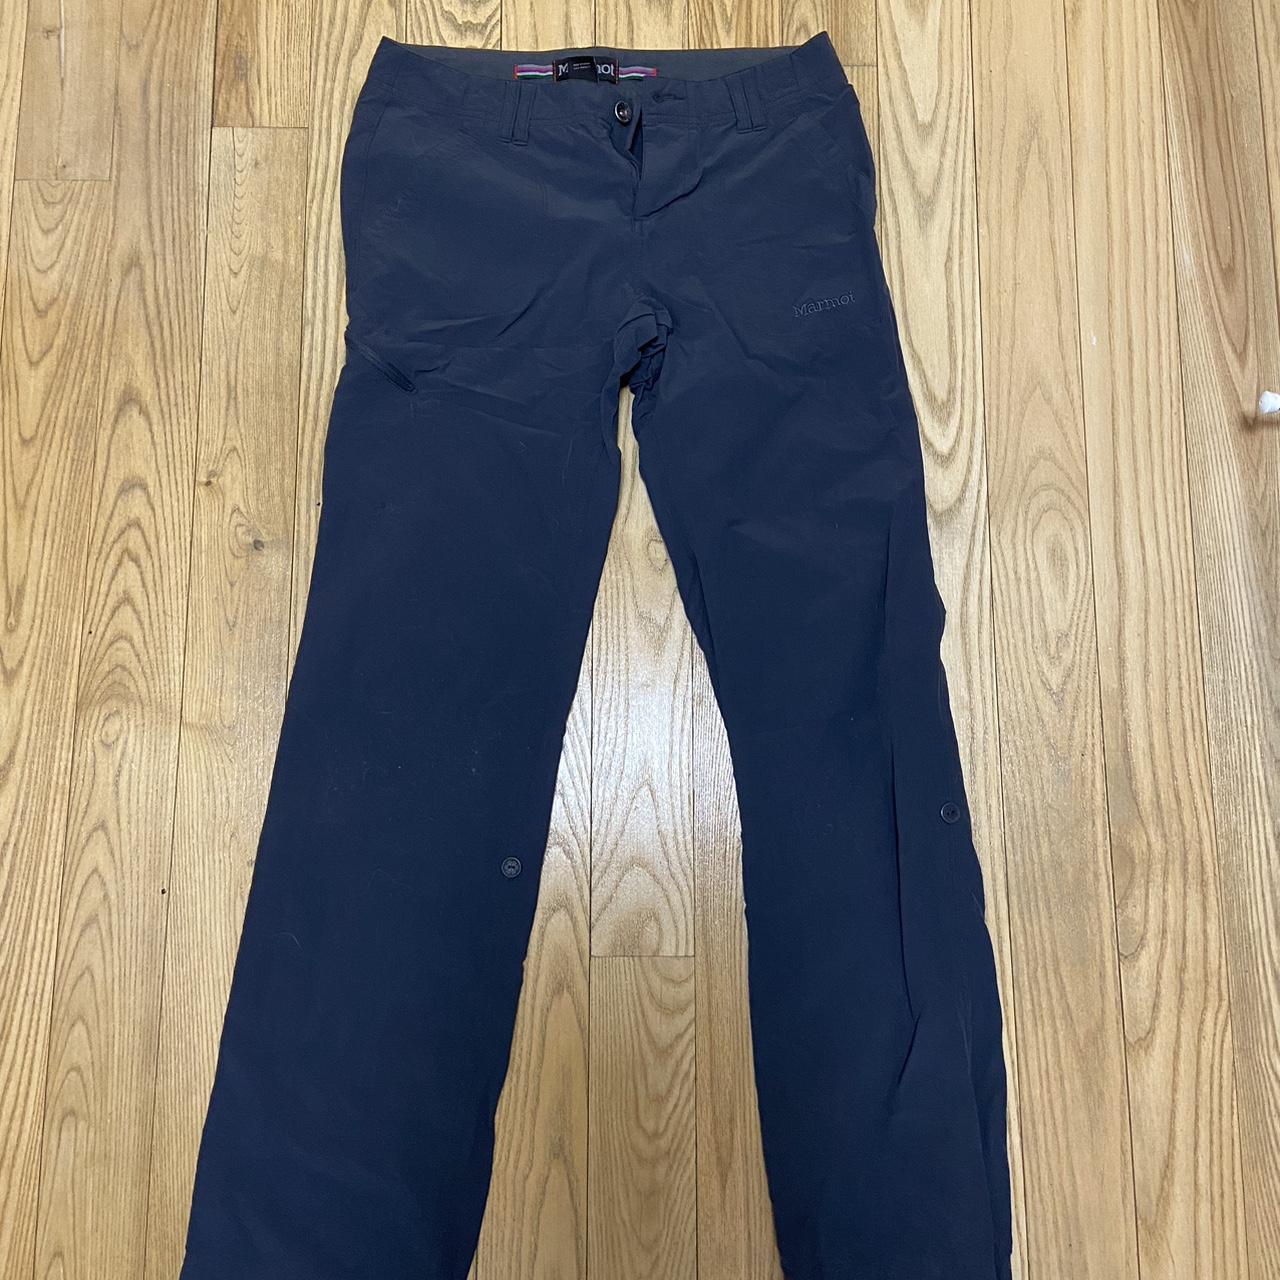 Navy blue/ charcoal colored Marmot hiking pants. In... - Depop